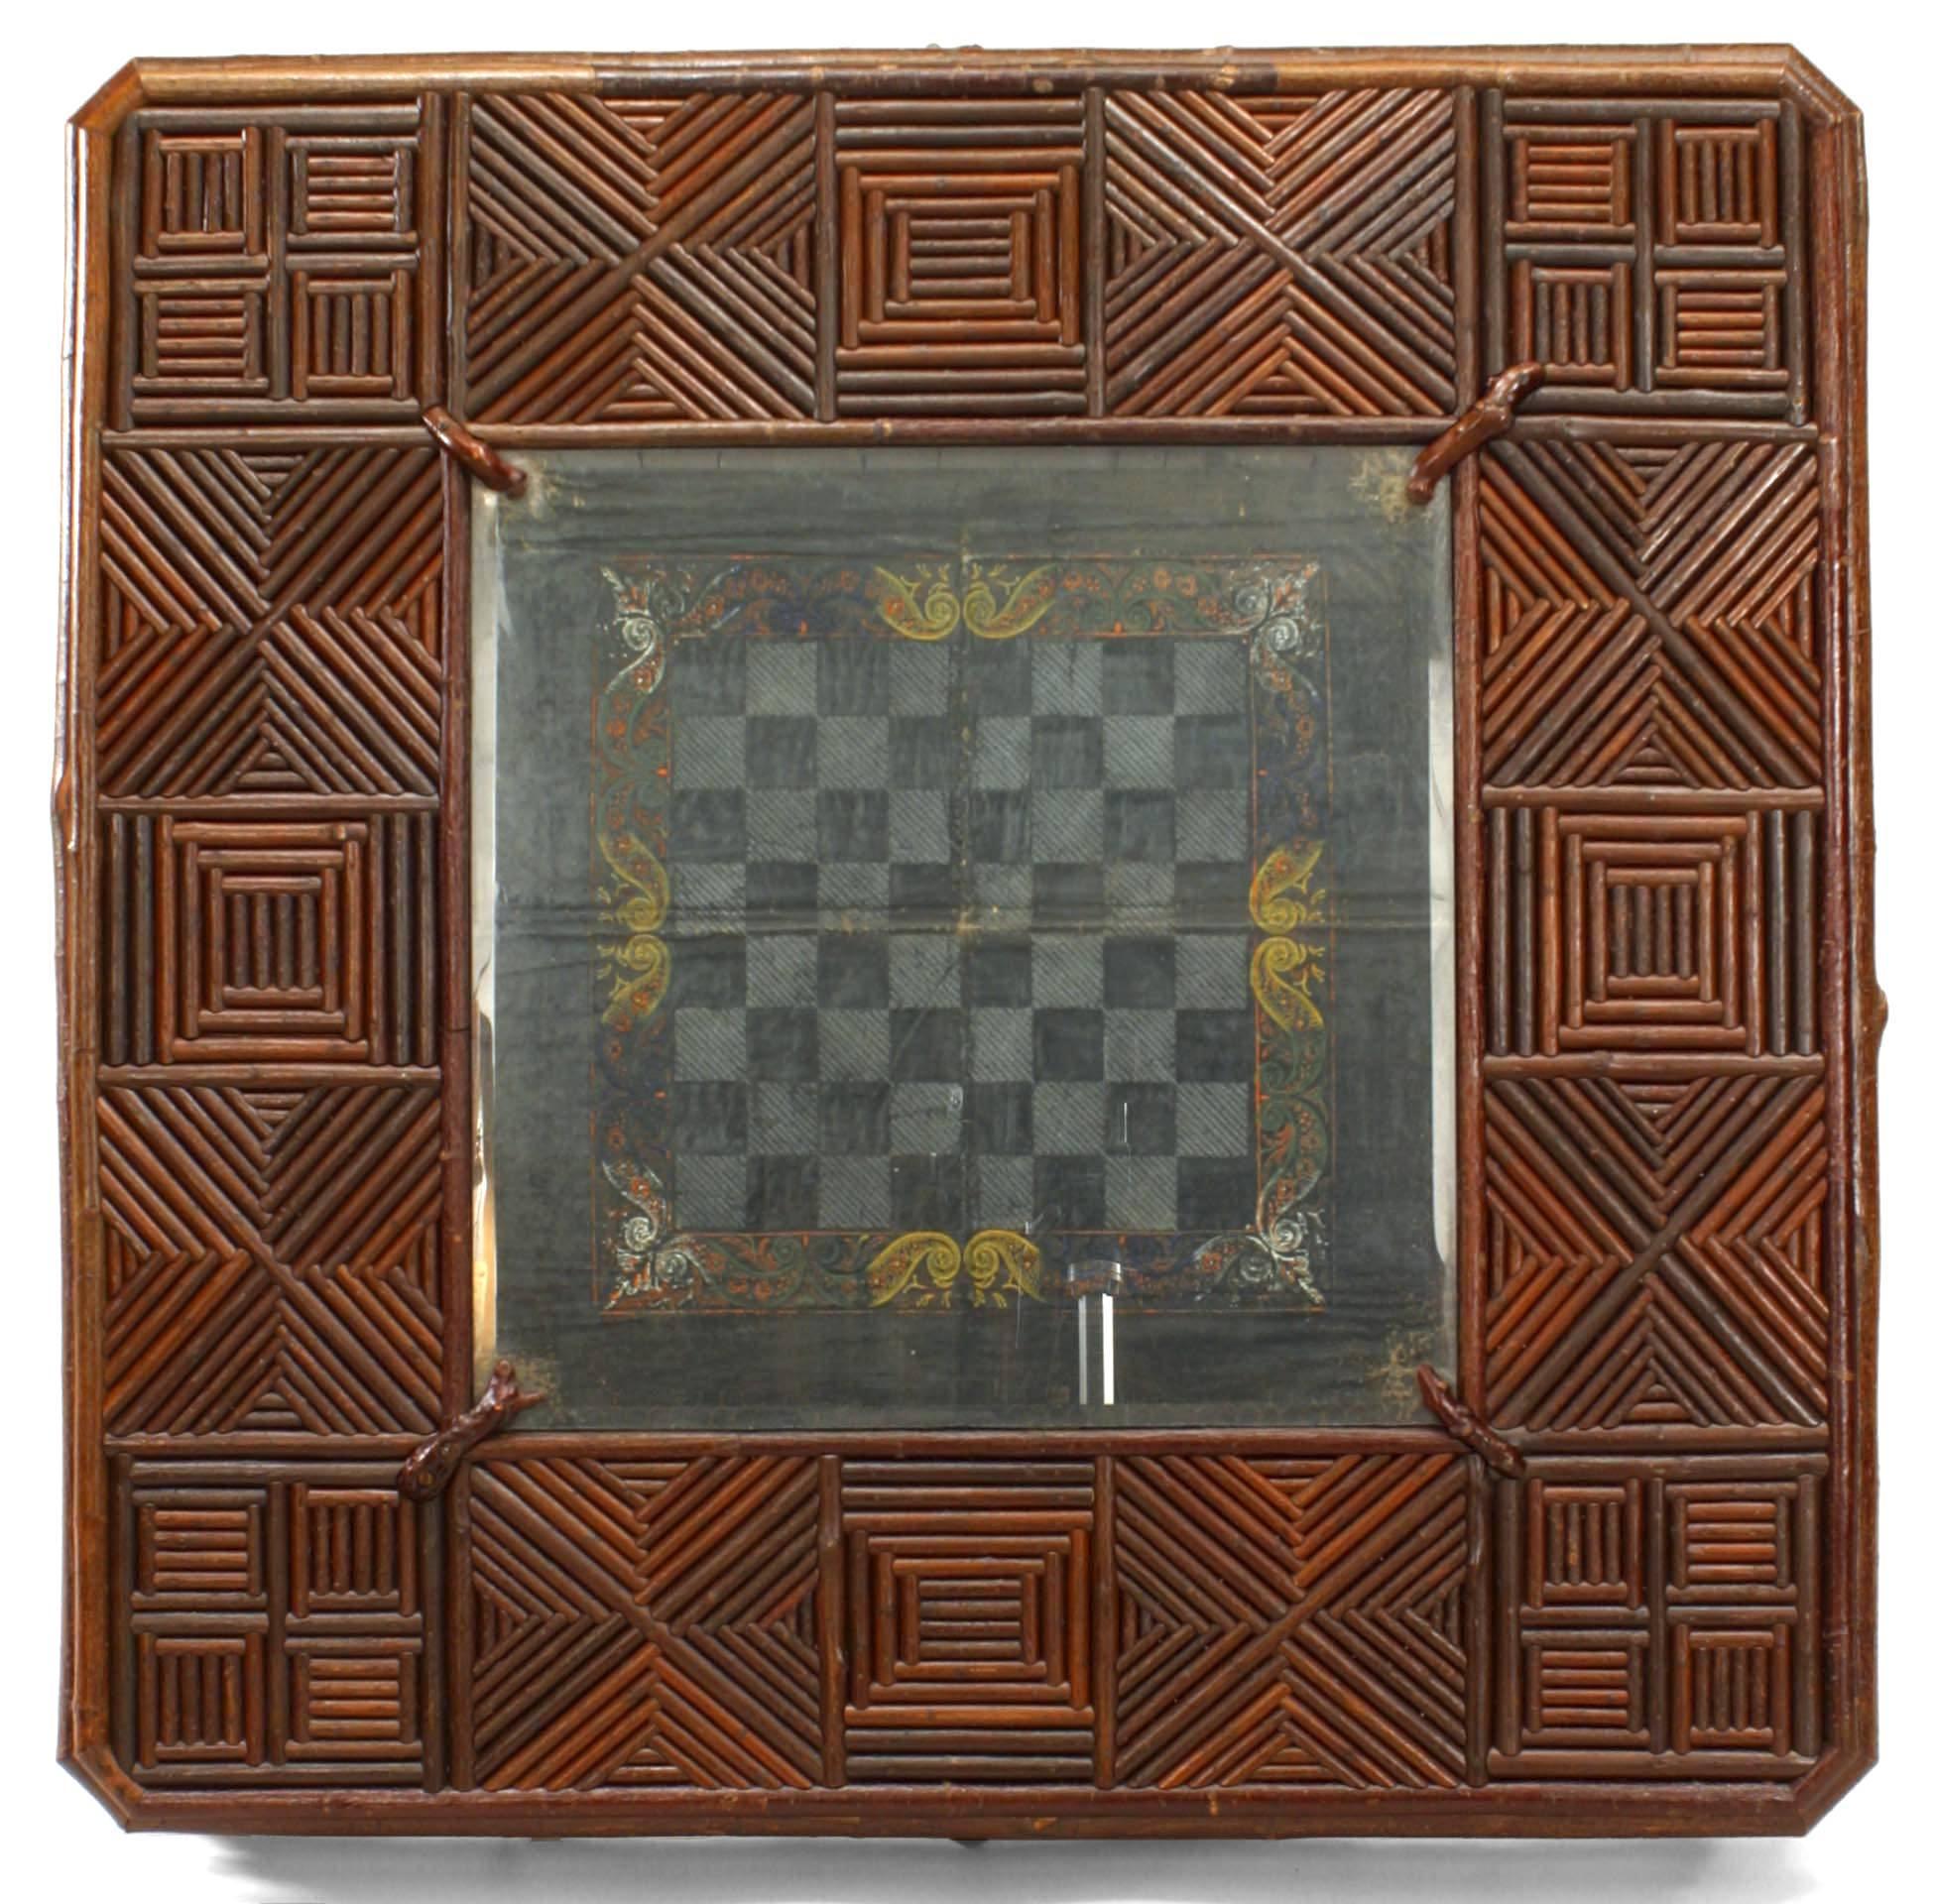 Adirondack American Rustic Chess Game Table with Slat Twig and Root Design For Sale